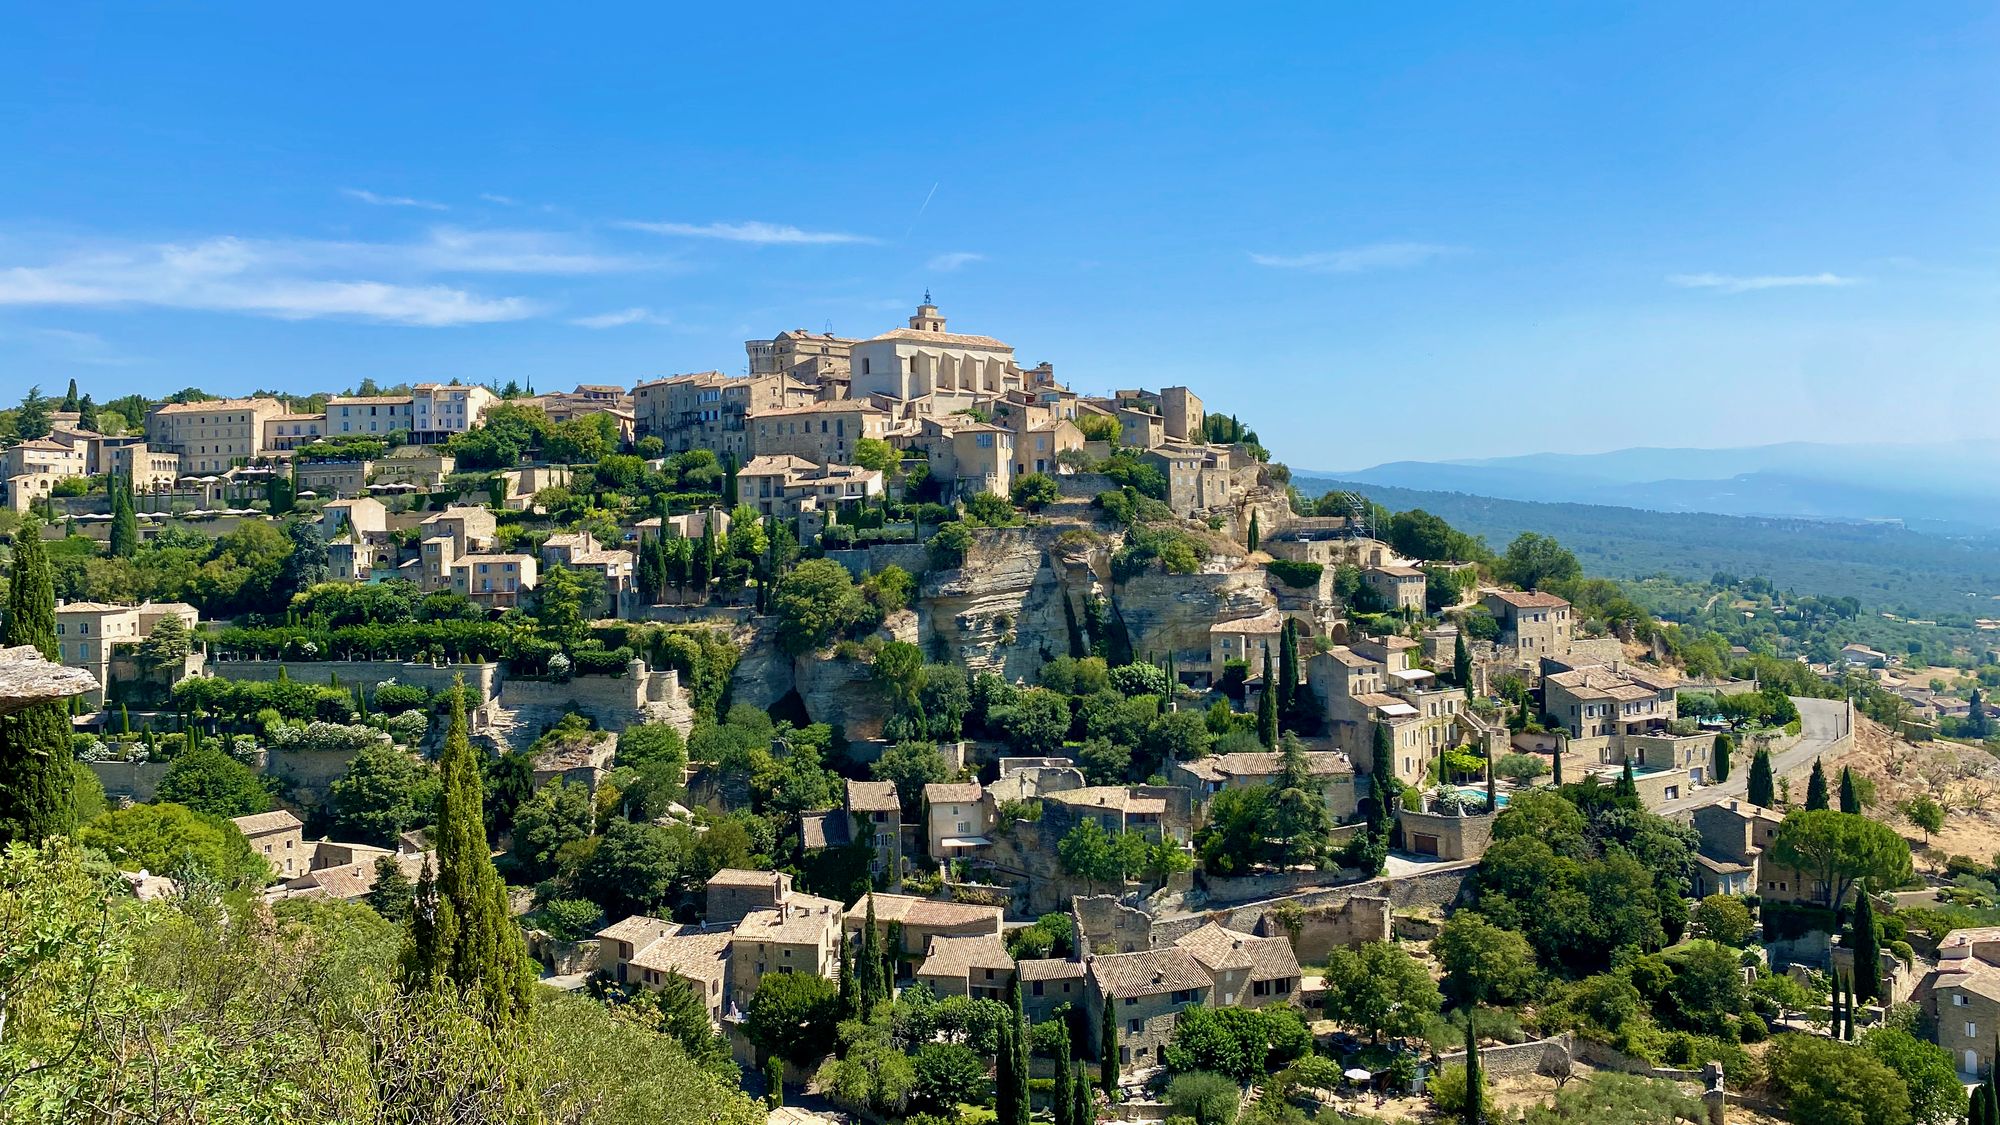 View over the town of Gordes in France